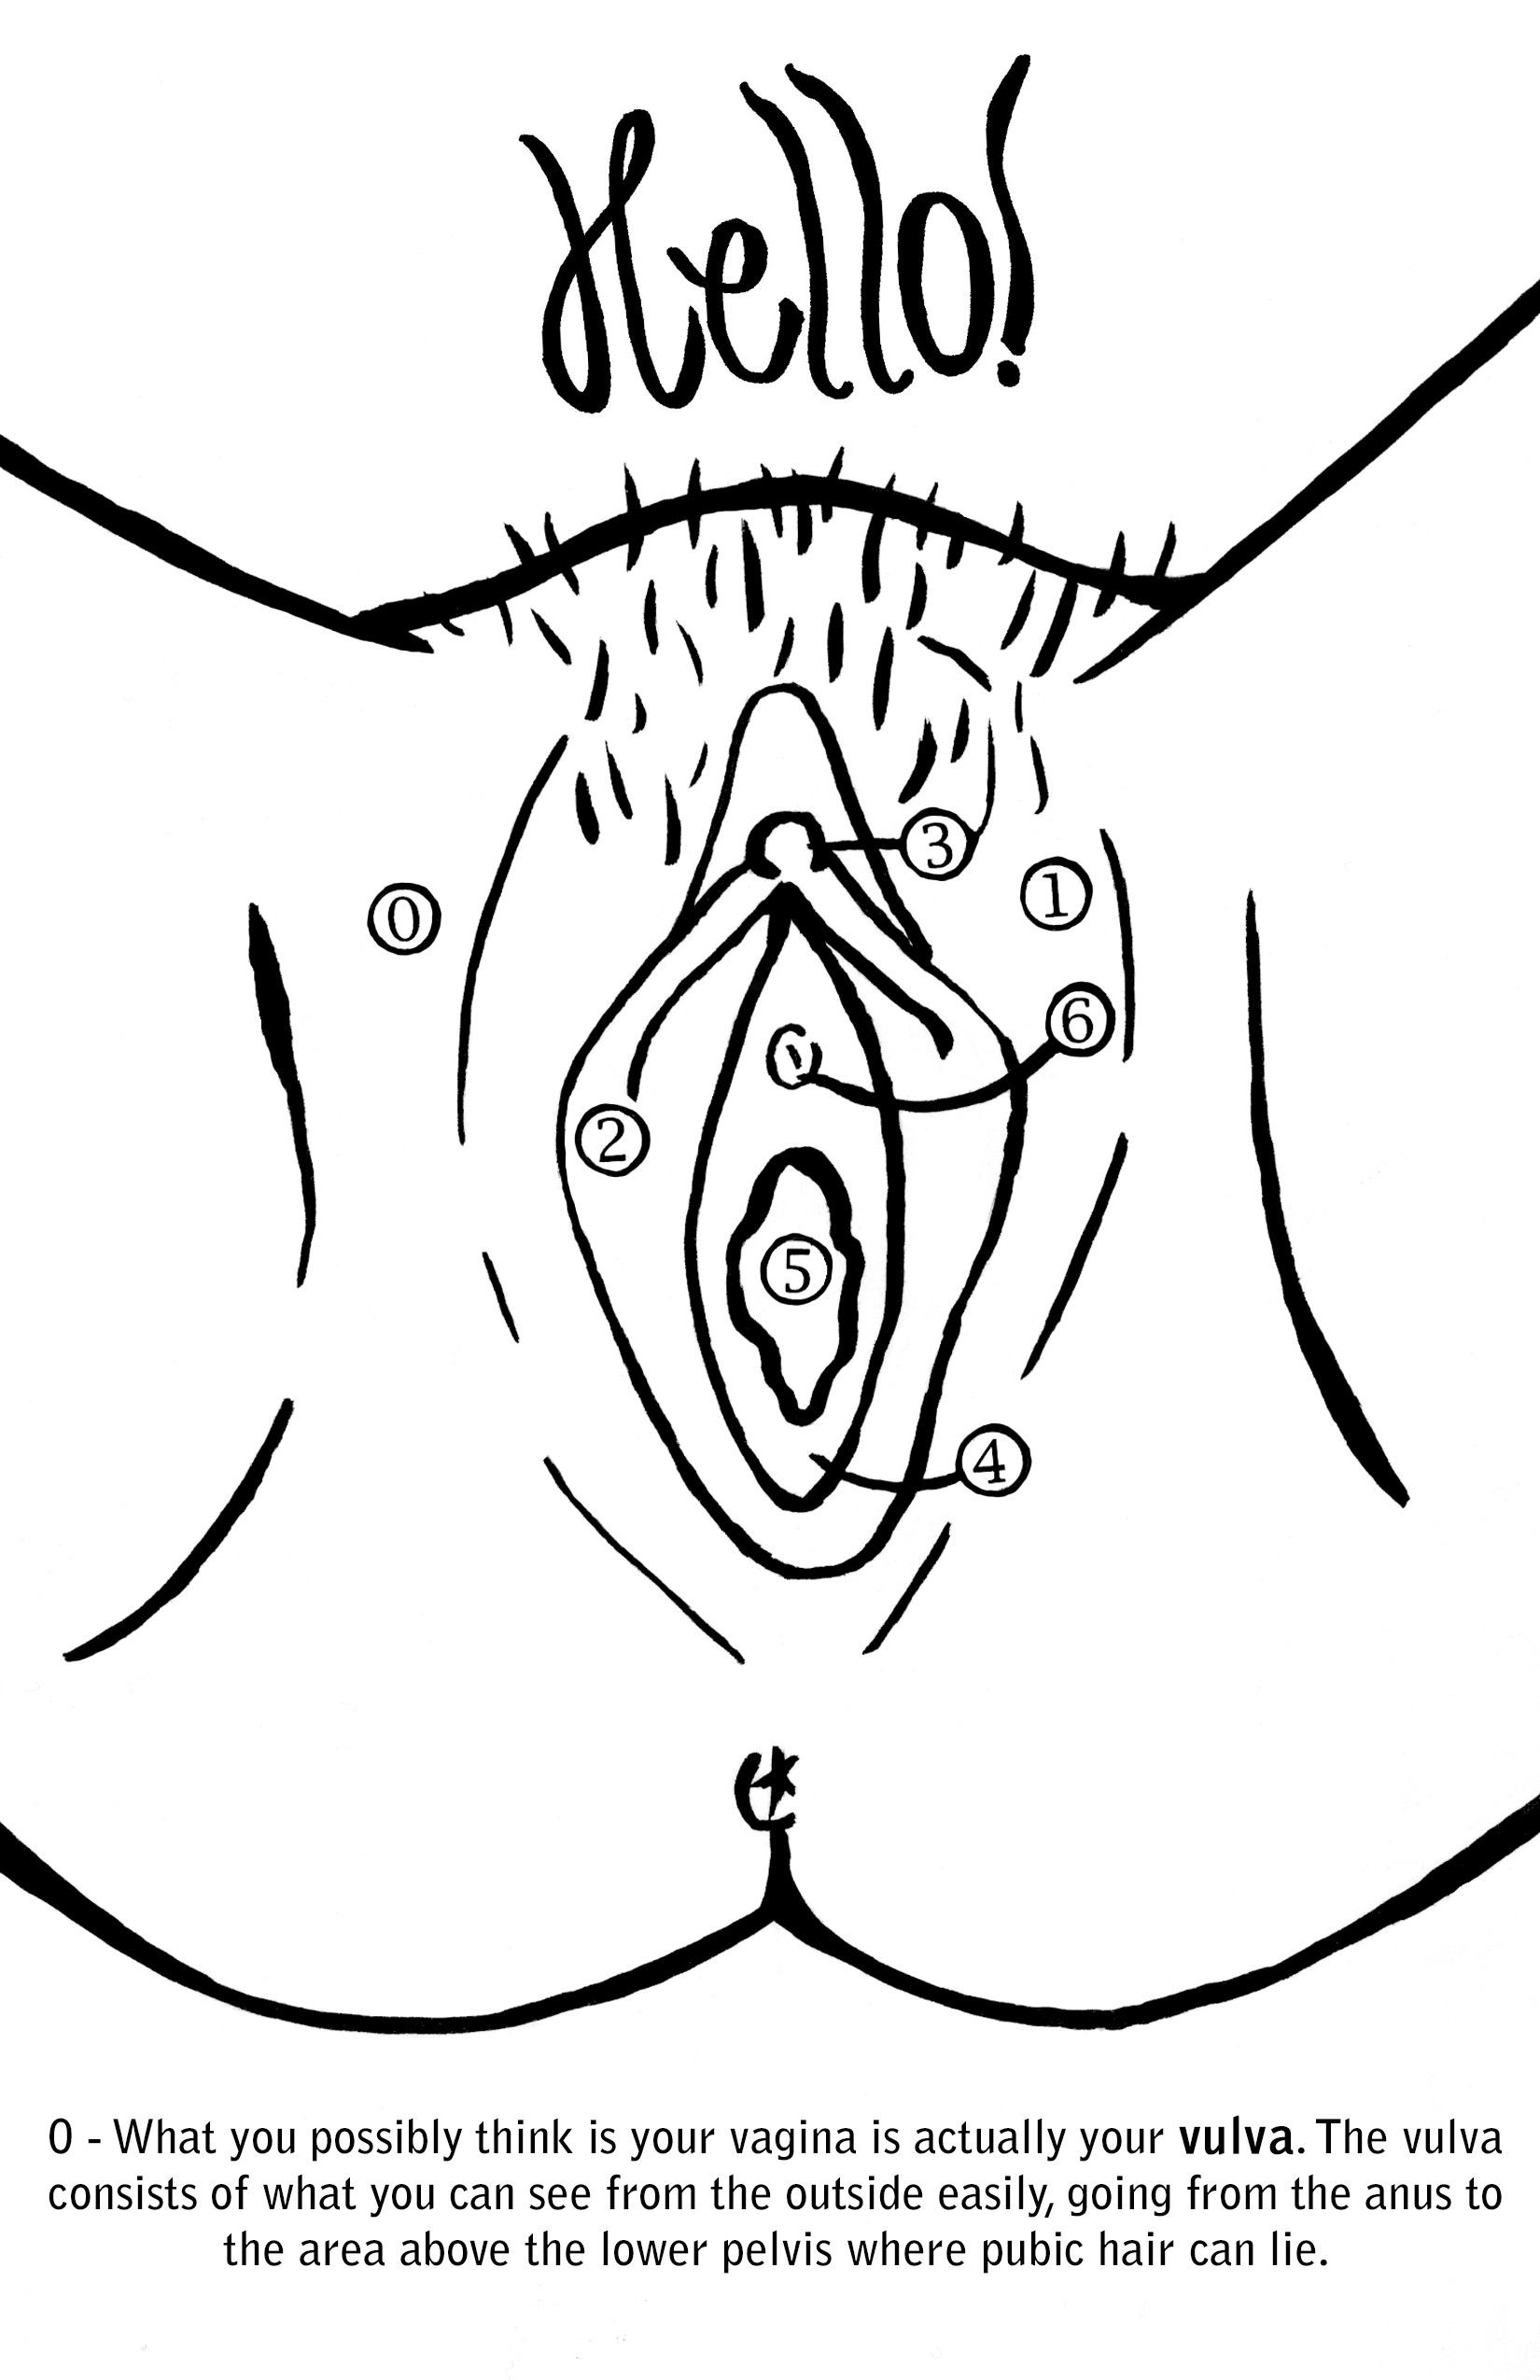 Vagina Coloring Book
 Hello Vagina This coloring book was motivated by the